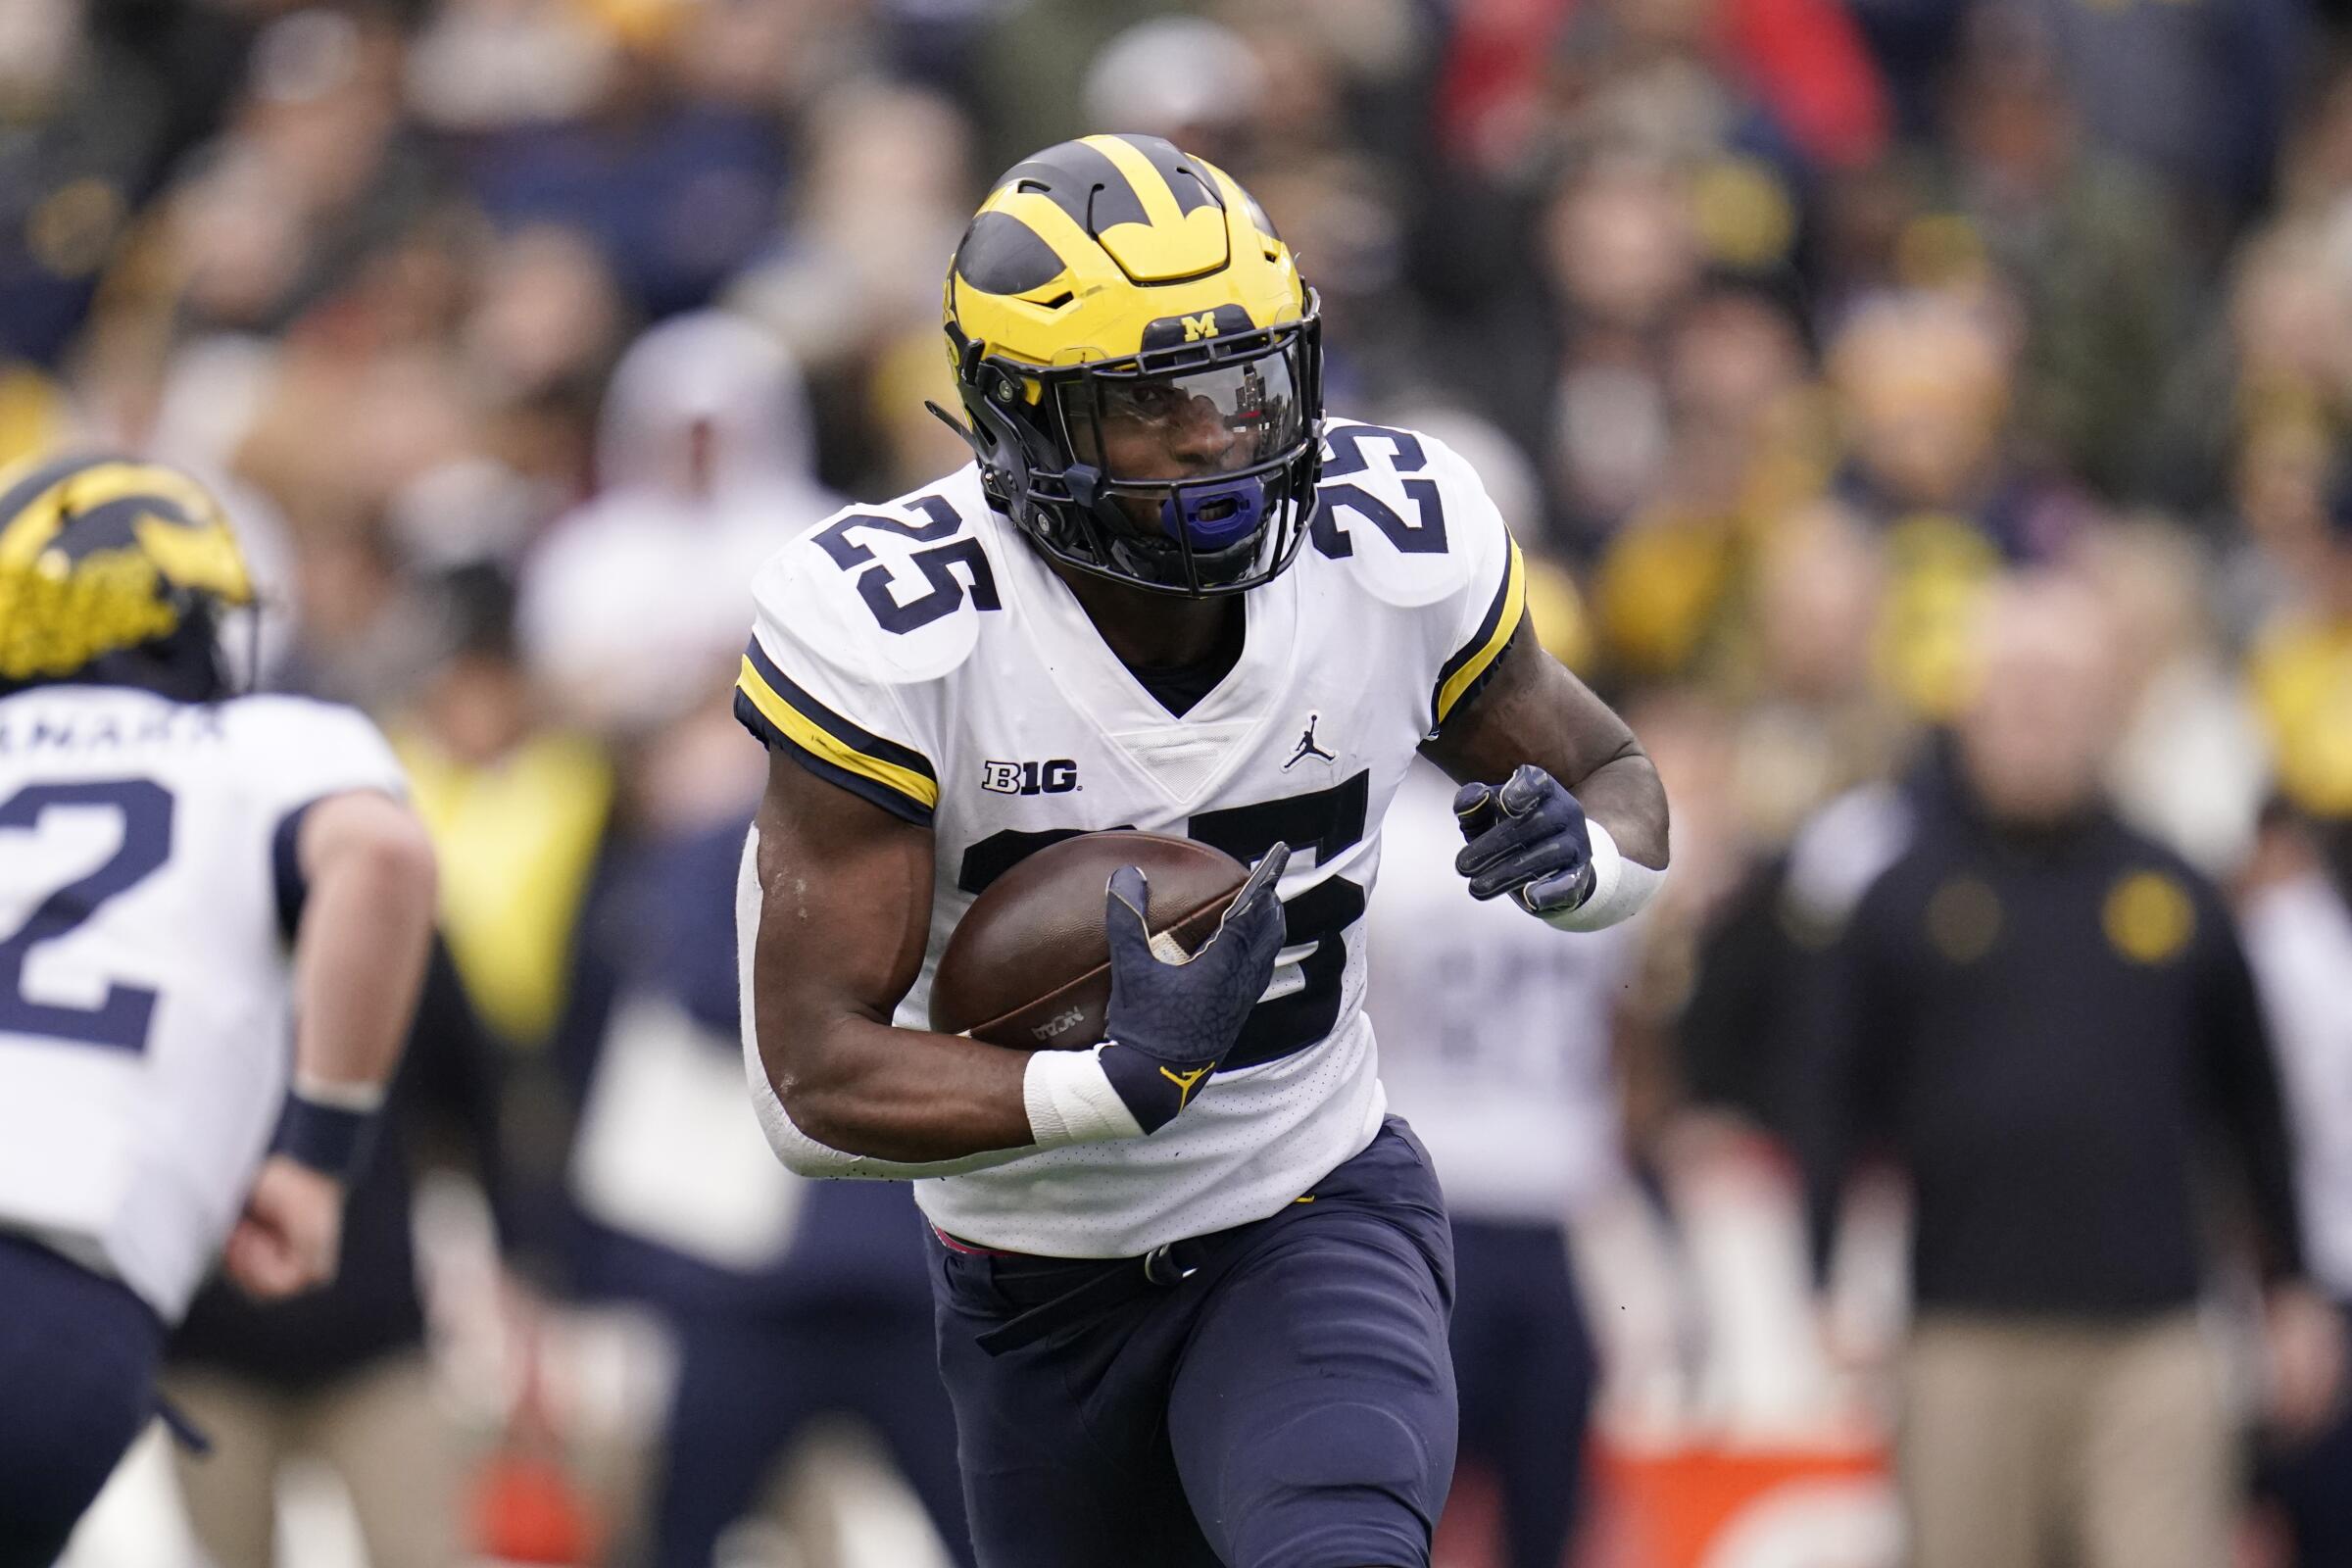 Michigan running back Hassan Haskins runs with the ball against Maryland.